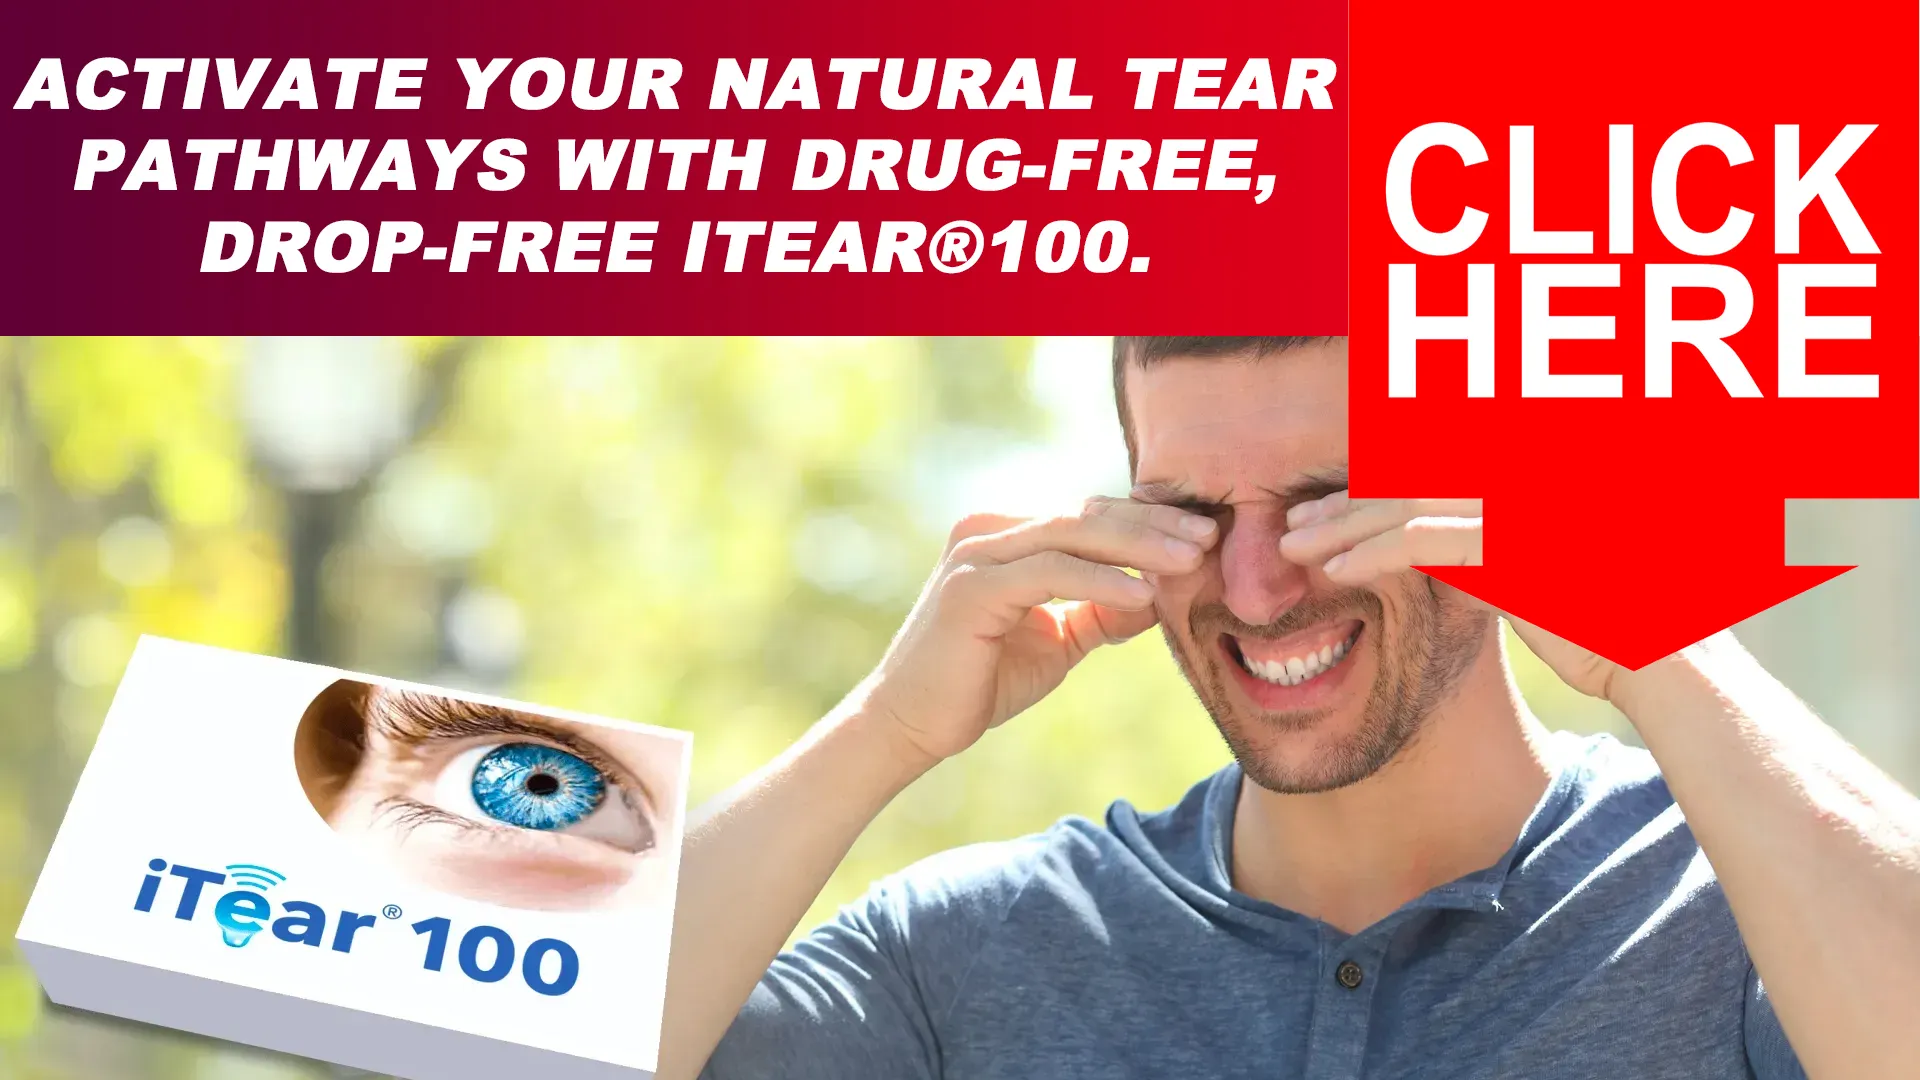 Experience the Instantaneous Relief Offered by iTear100